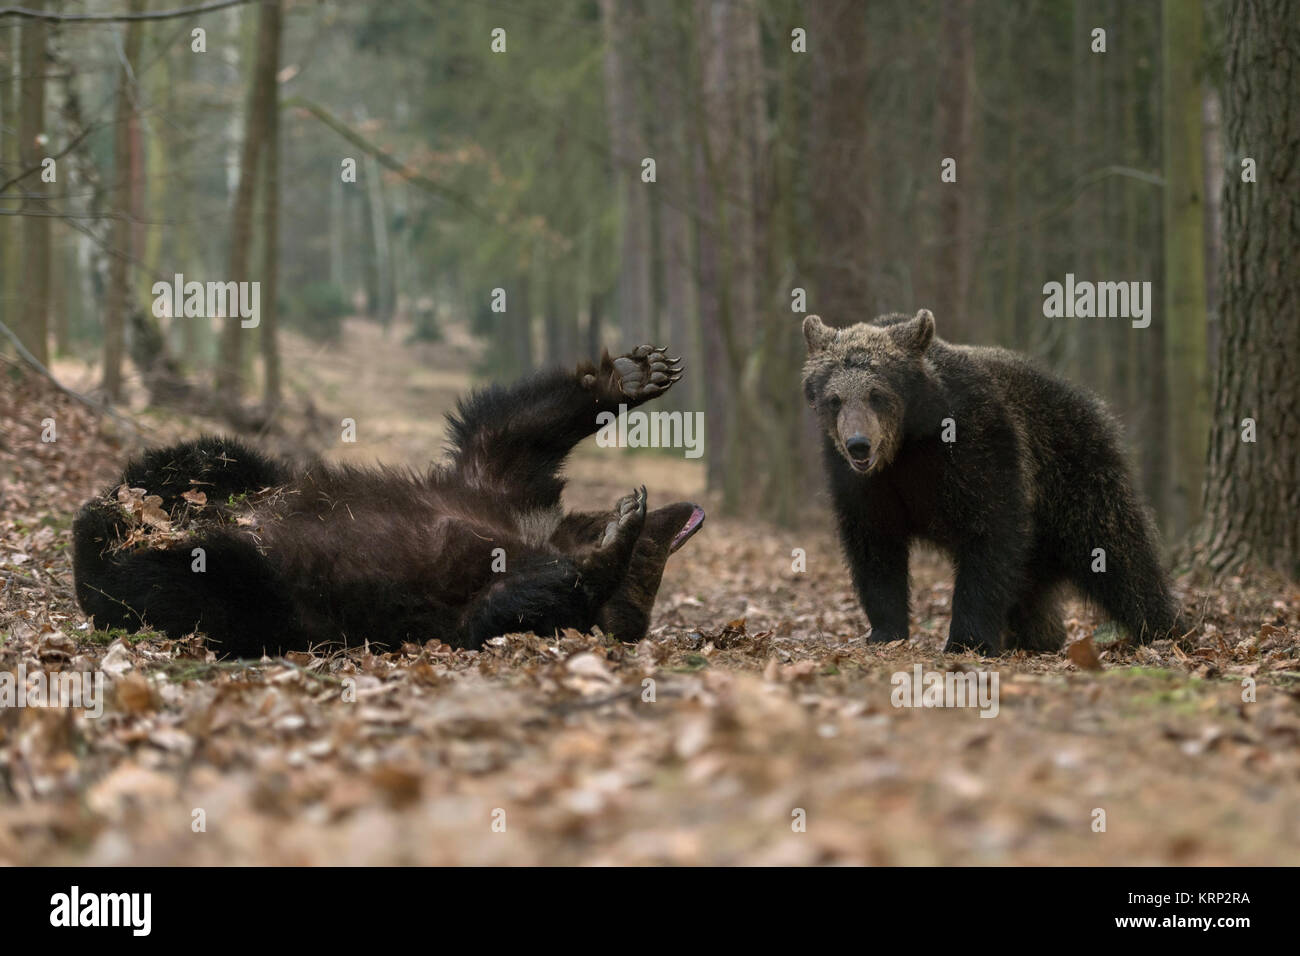 Brown Bear /  Bears ( Ursus arctos ), young cubs, siblings, adolescent, playing together in dry foliage of an autumnal mixed forest, Europe. Stock Photo